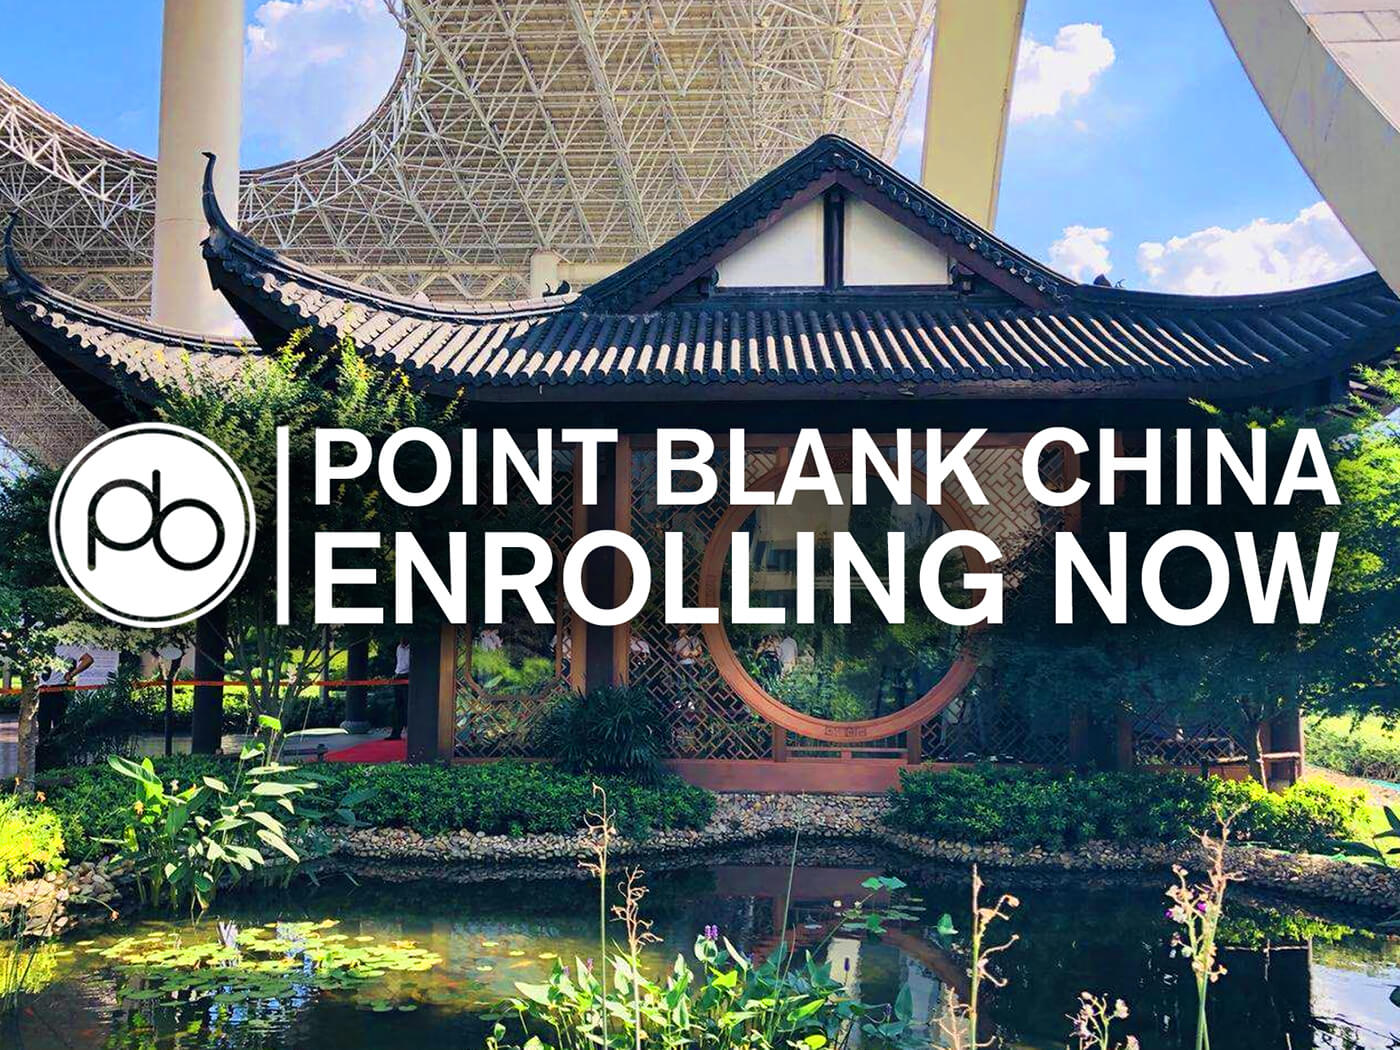 Point Blank China Enrolling now